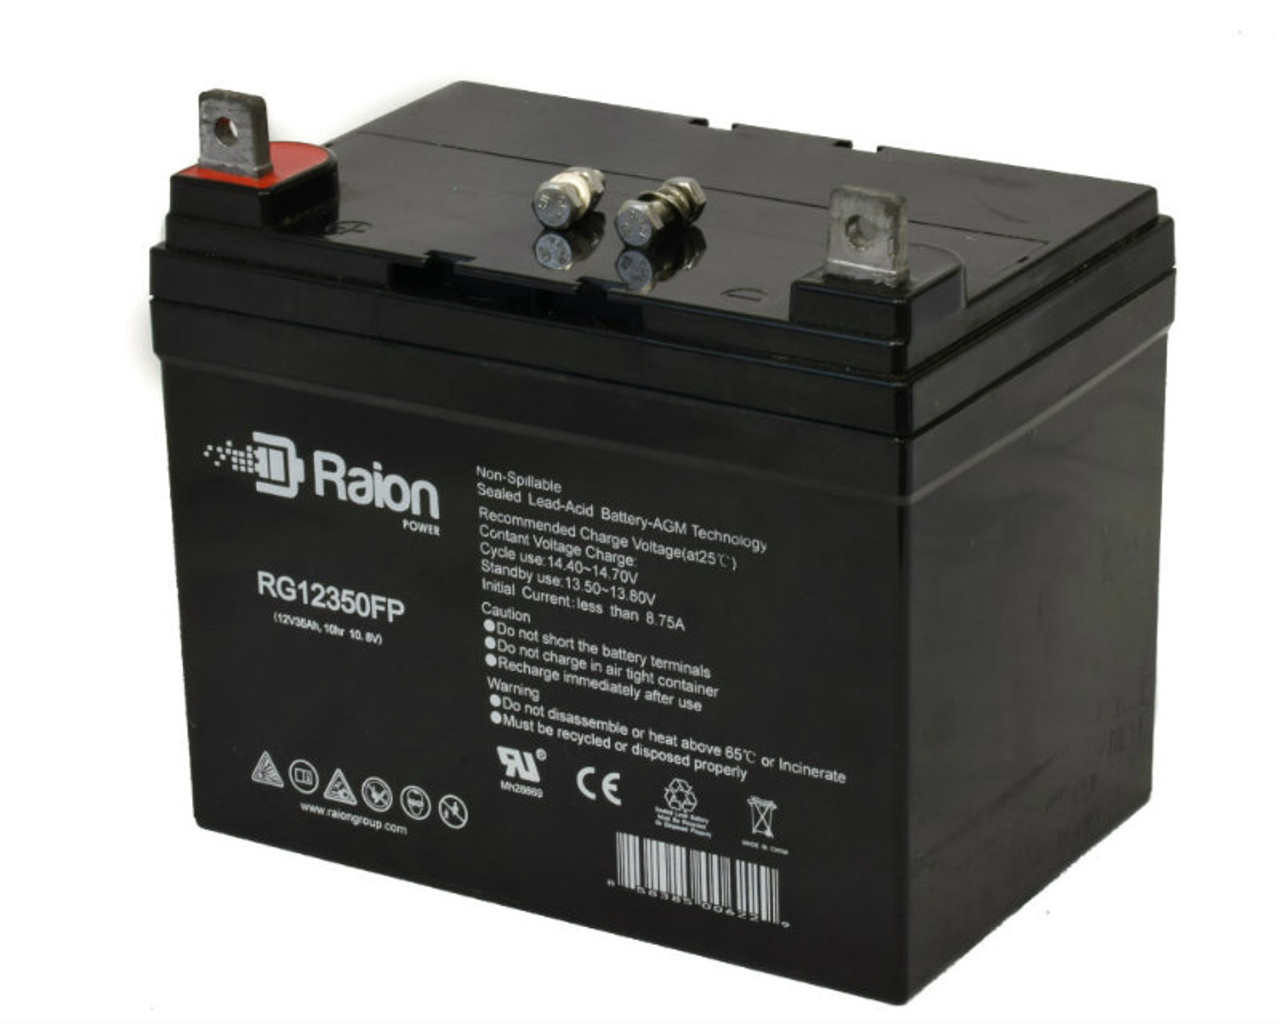 Raion Power Replacement 12V 35Ah RG12350FP Mobility Scooter Battery for Electric Mobility Rascal Tilt in Space Powercair